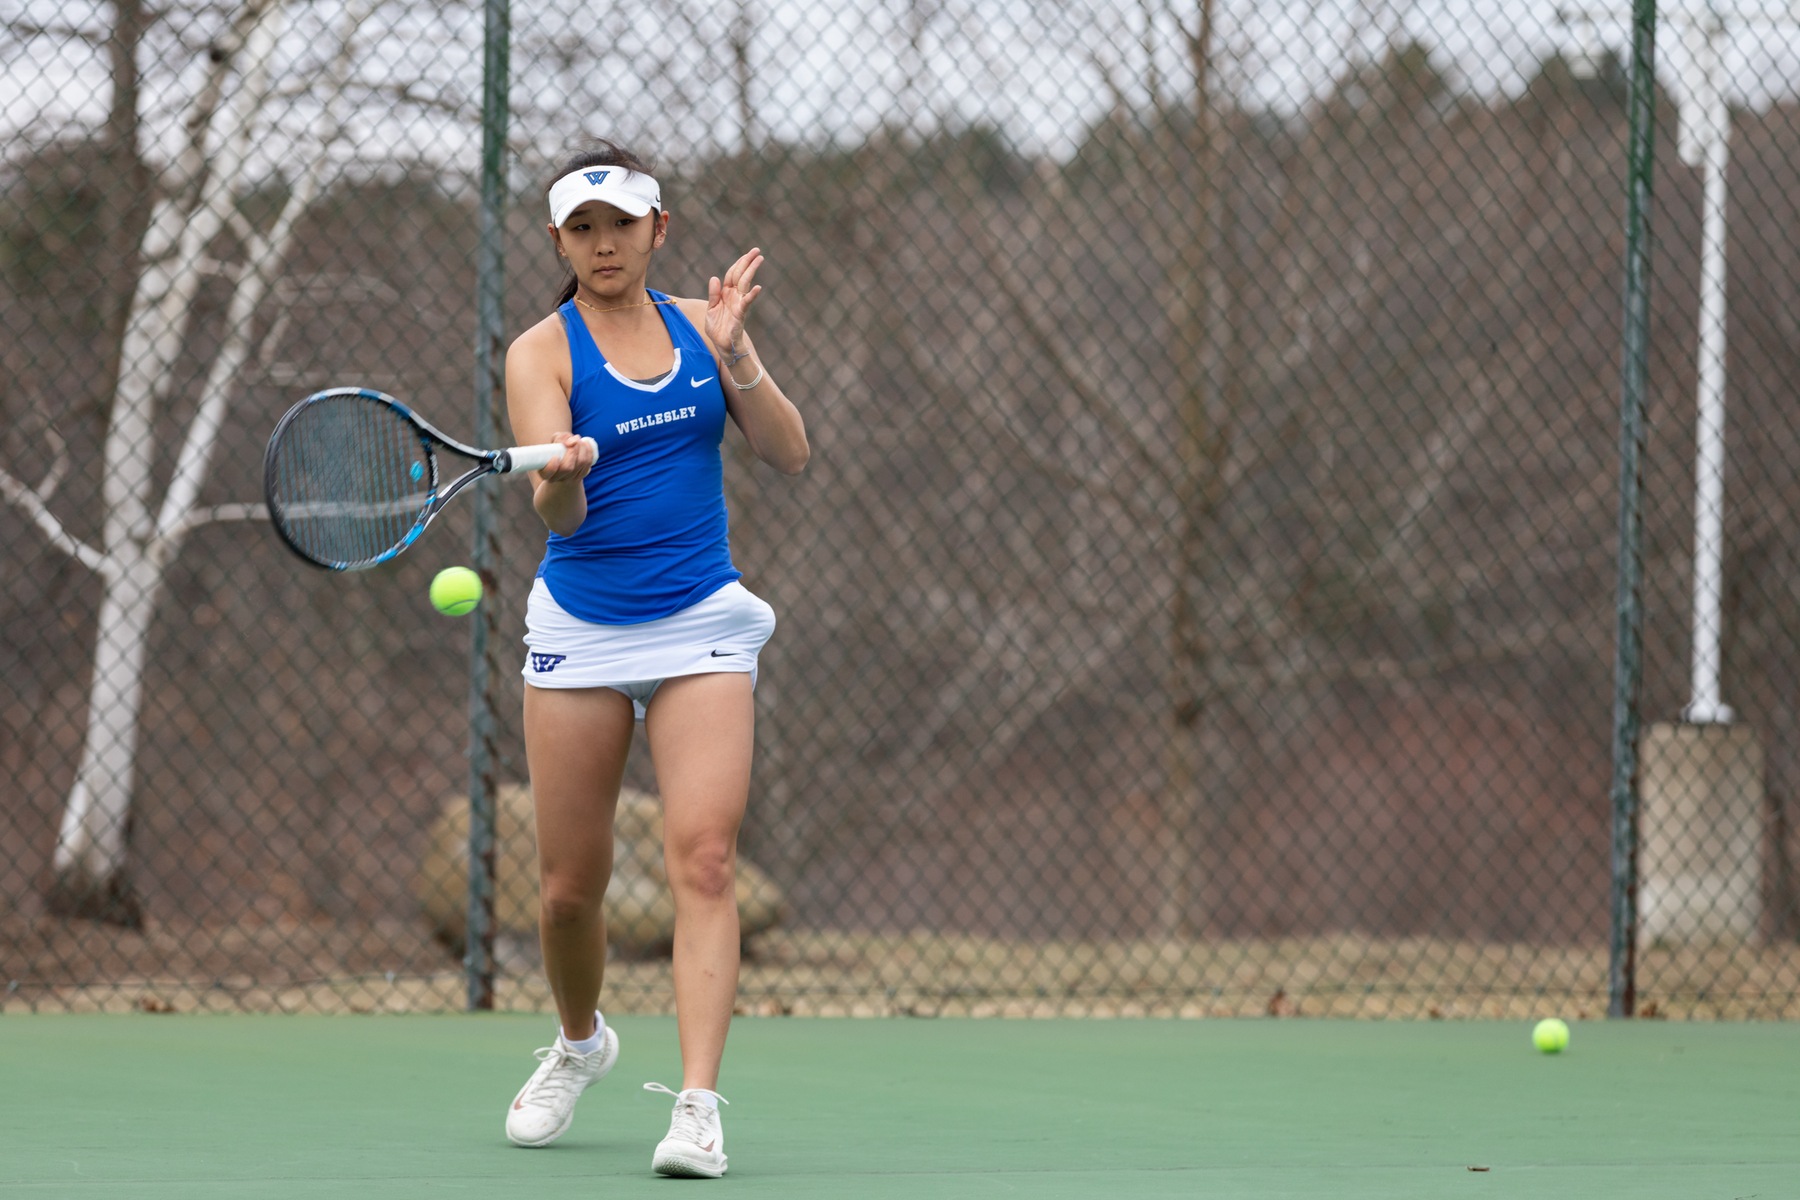 Wellesley Tennis Opens Competition at Bowdoin Invitational